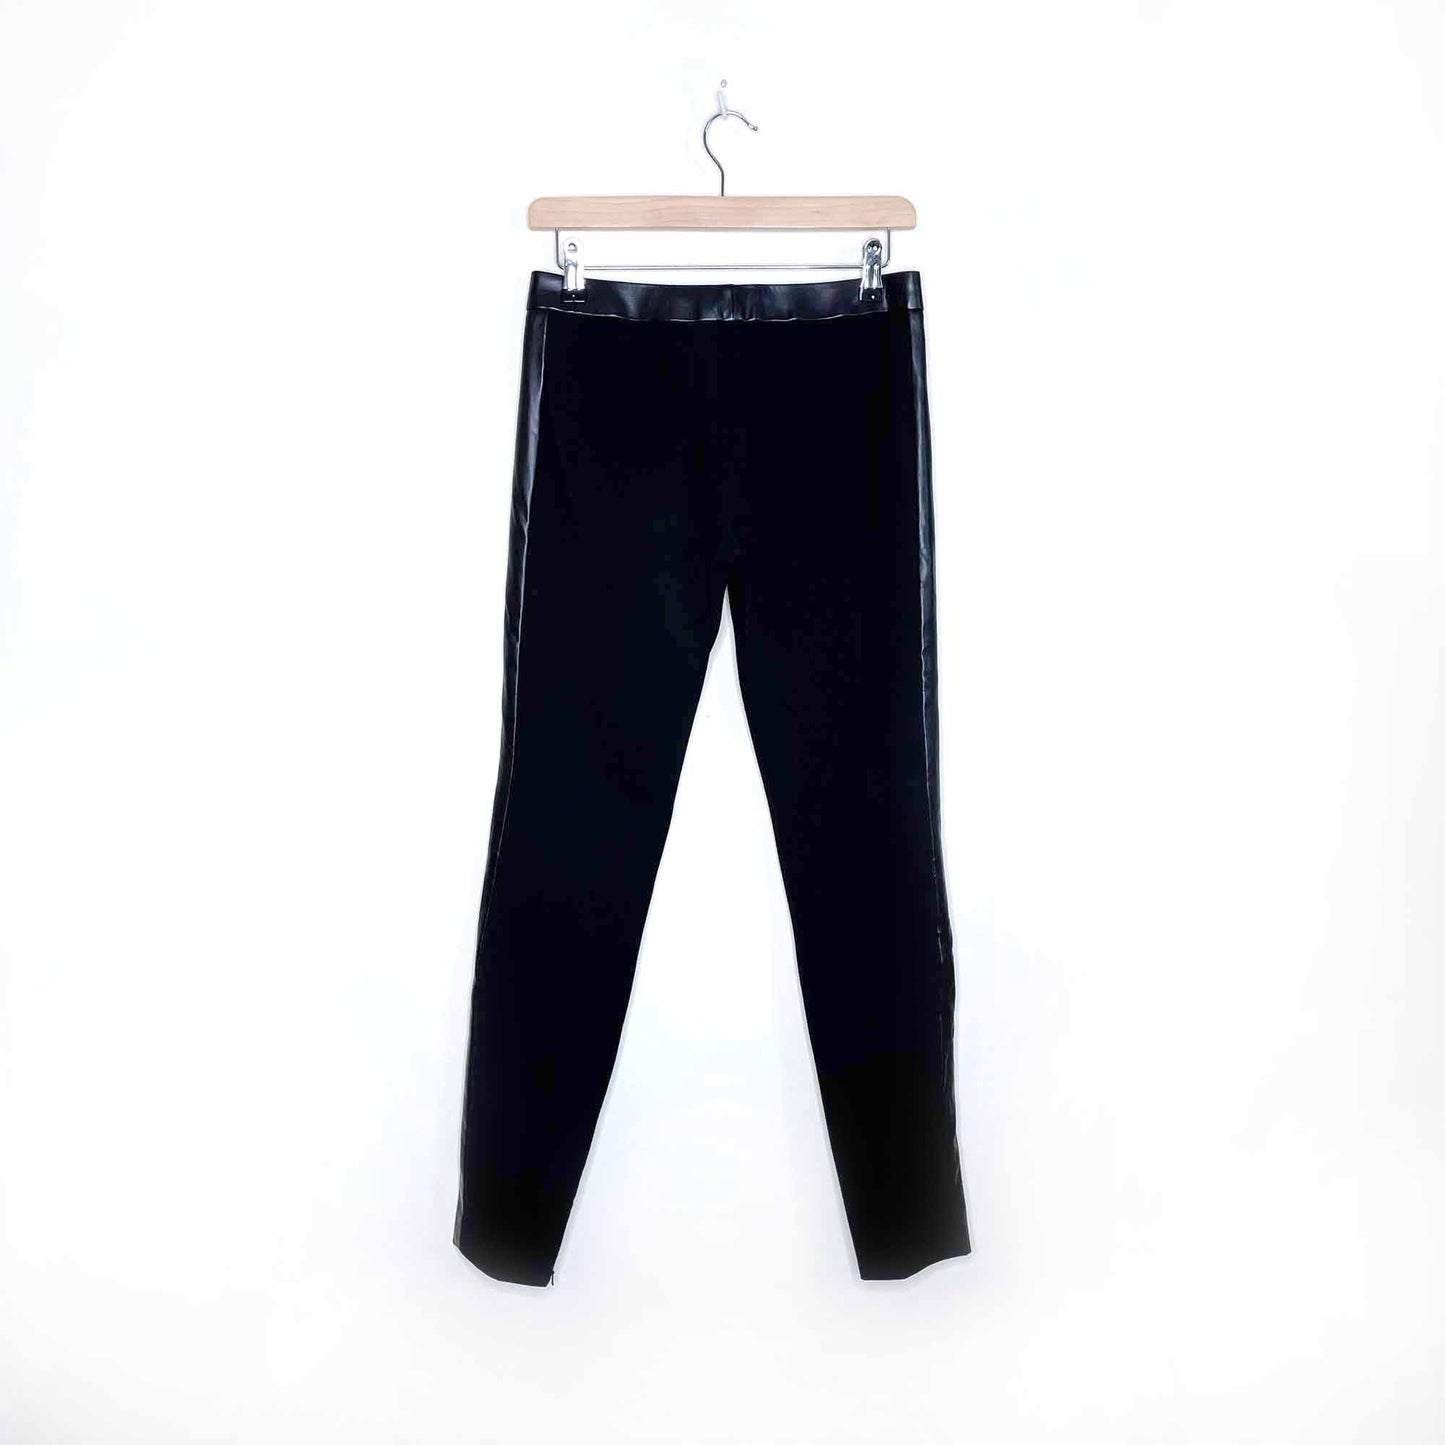 tory burch legging pants with faux leather panel - size xs